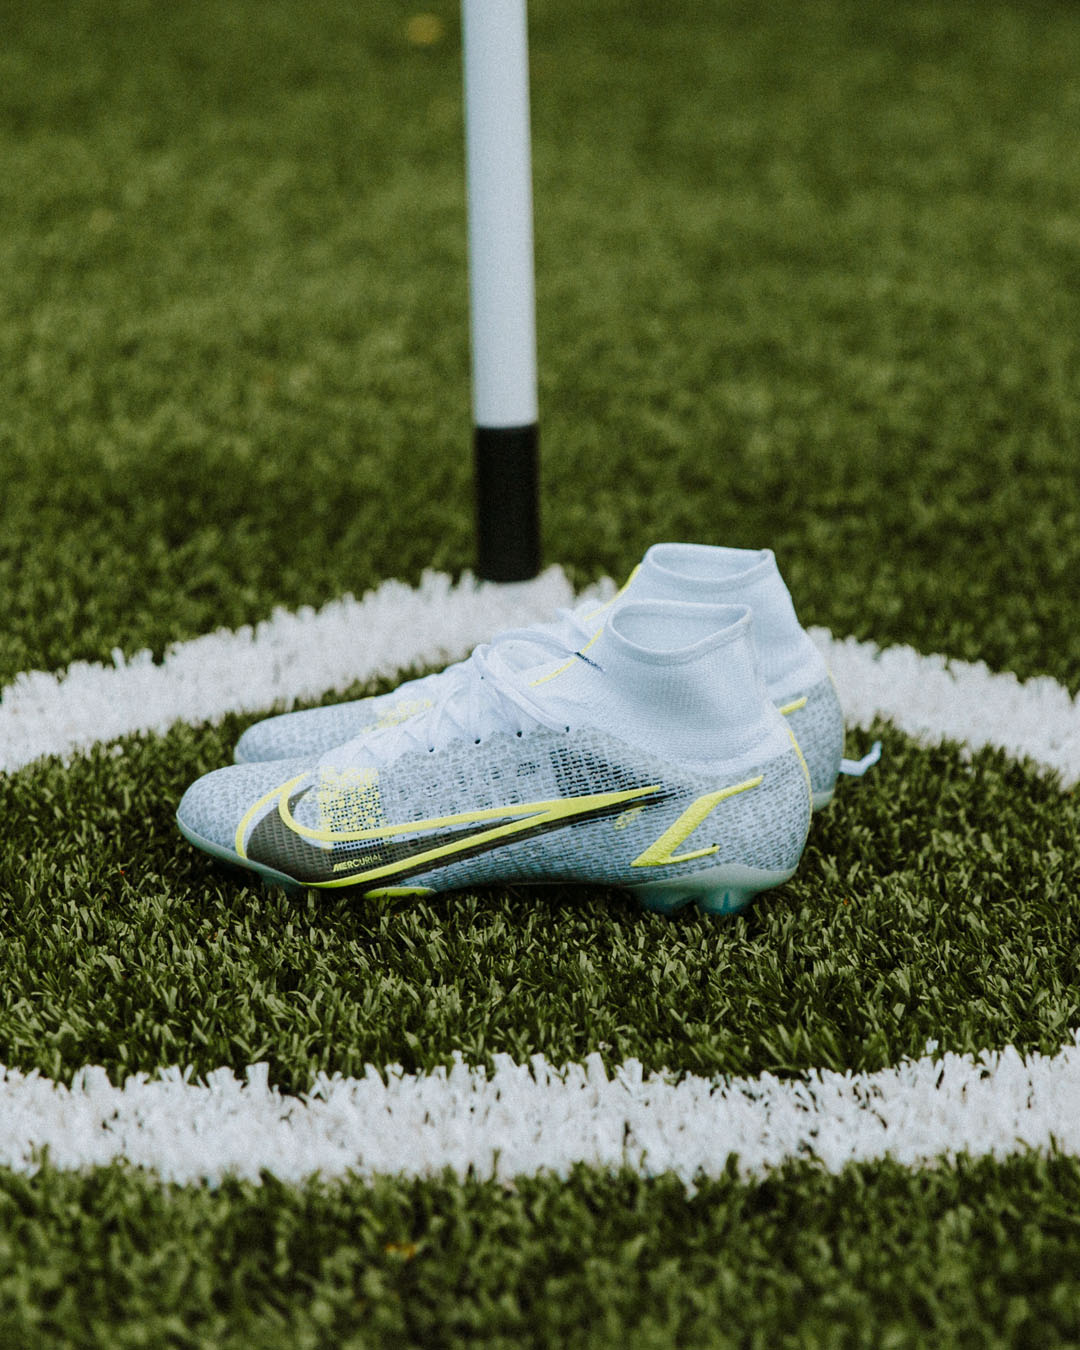 Soccer on X: "Superfly goes Safari Swipe see the latest Nike Mercurial Superfly VIII 'Safari' on pitch 🔍 Available at Pro:Direct Soccer 📲 Shop here 🛒 https://t.co/1mwt4NjPBa https://t.co/tMEYWdedQA" /